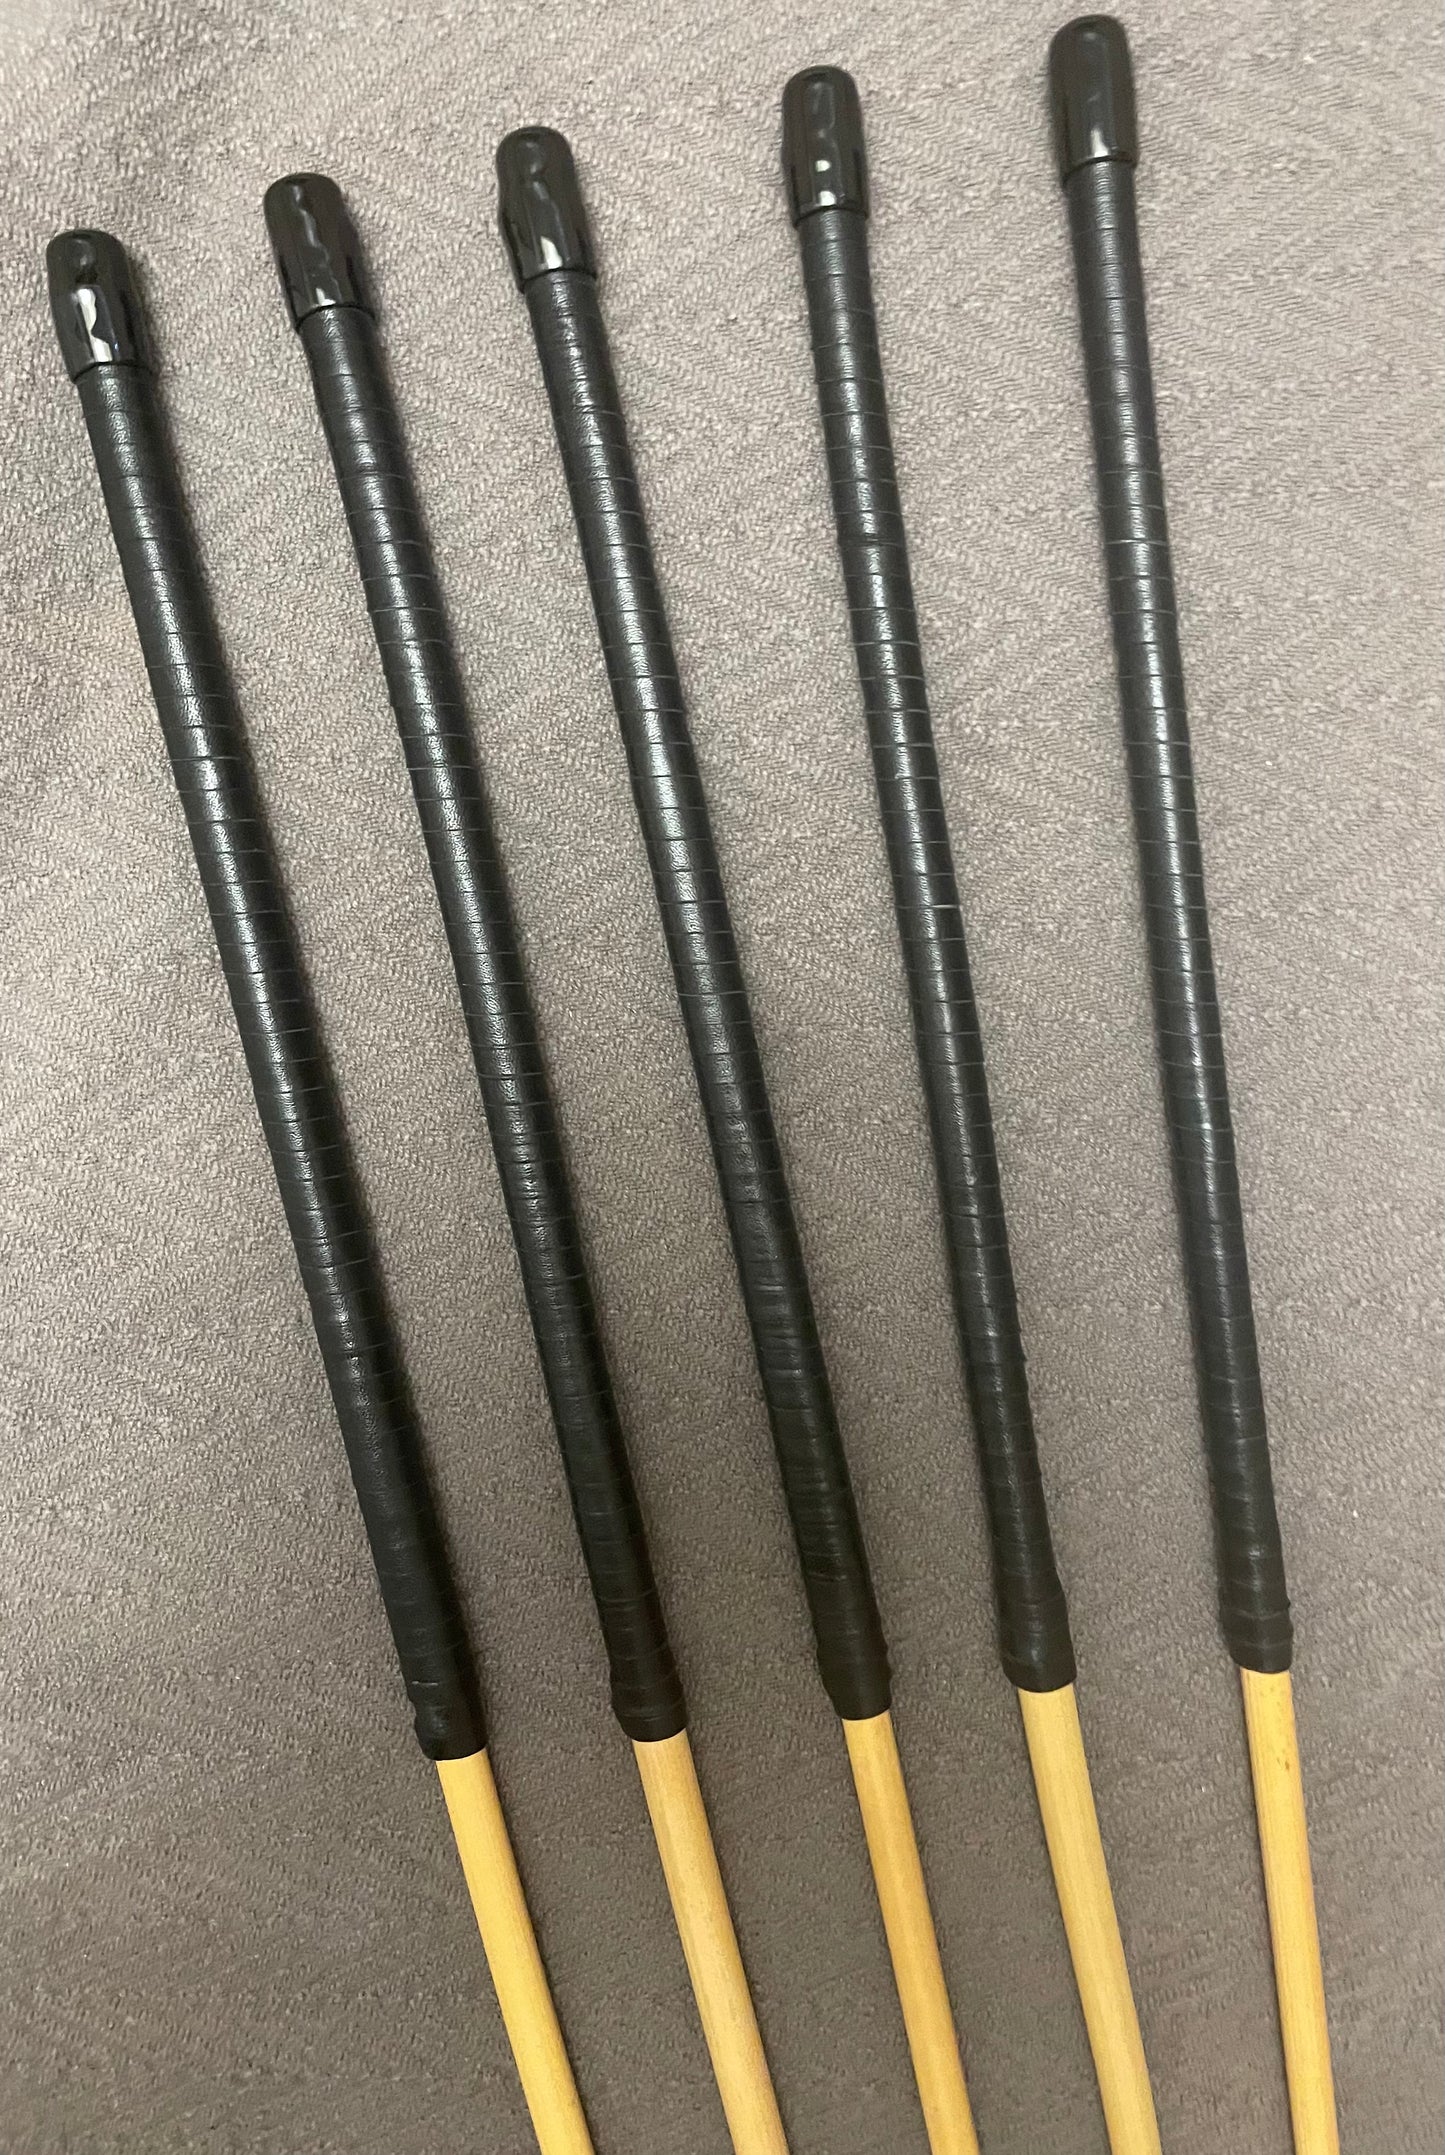 Set of 5 Knotless Dragon Canes / No Knot Rattan Canes / Ultimate Canes with Black Kangaroo Leather Handles